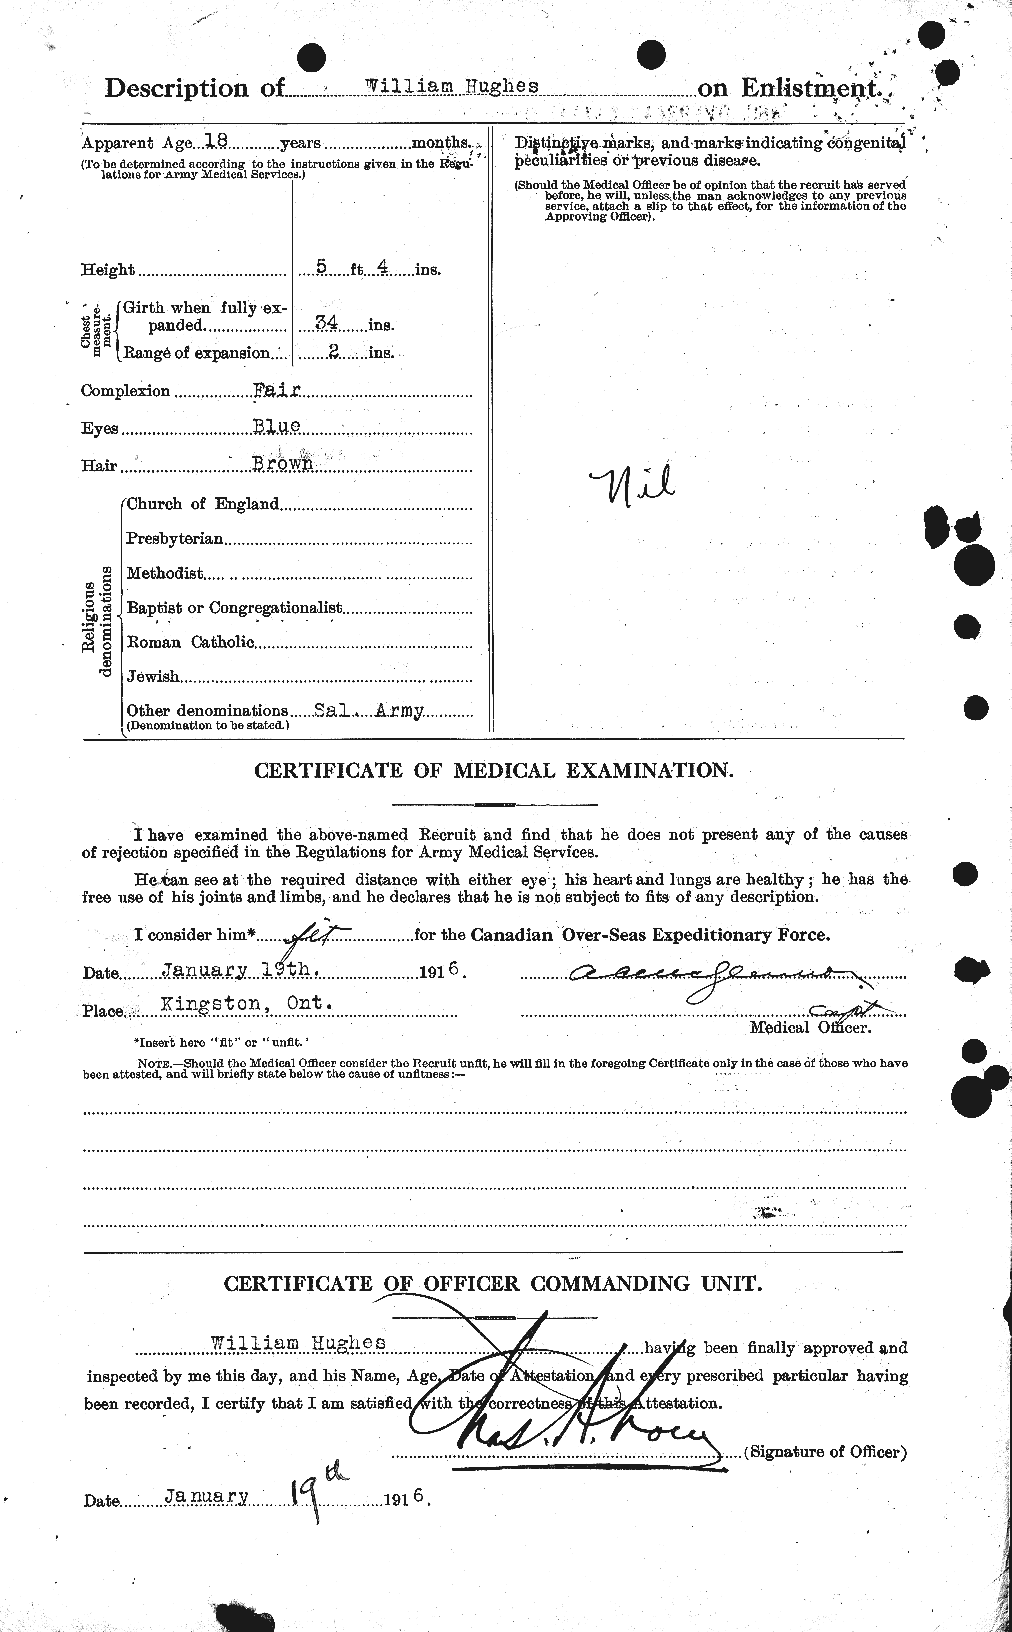 Personnel Records of the First World War - CEF 405904b